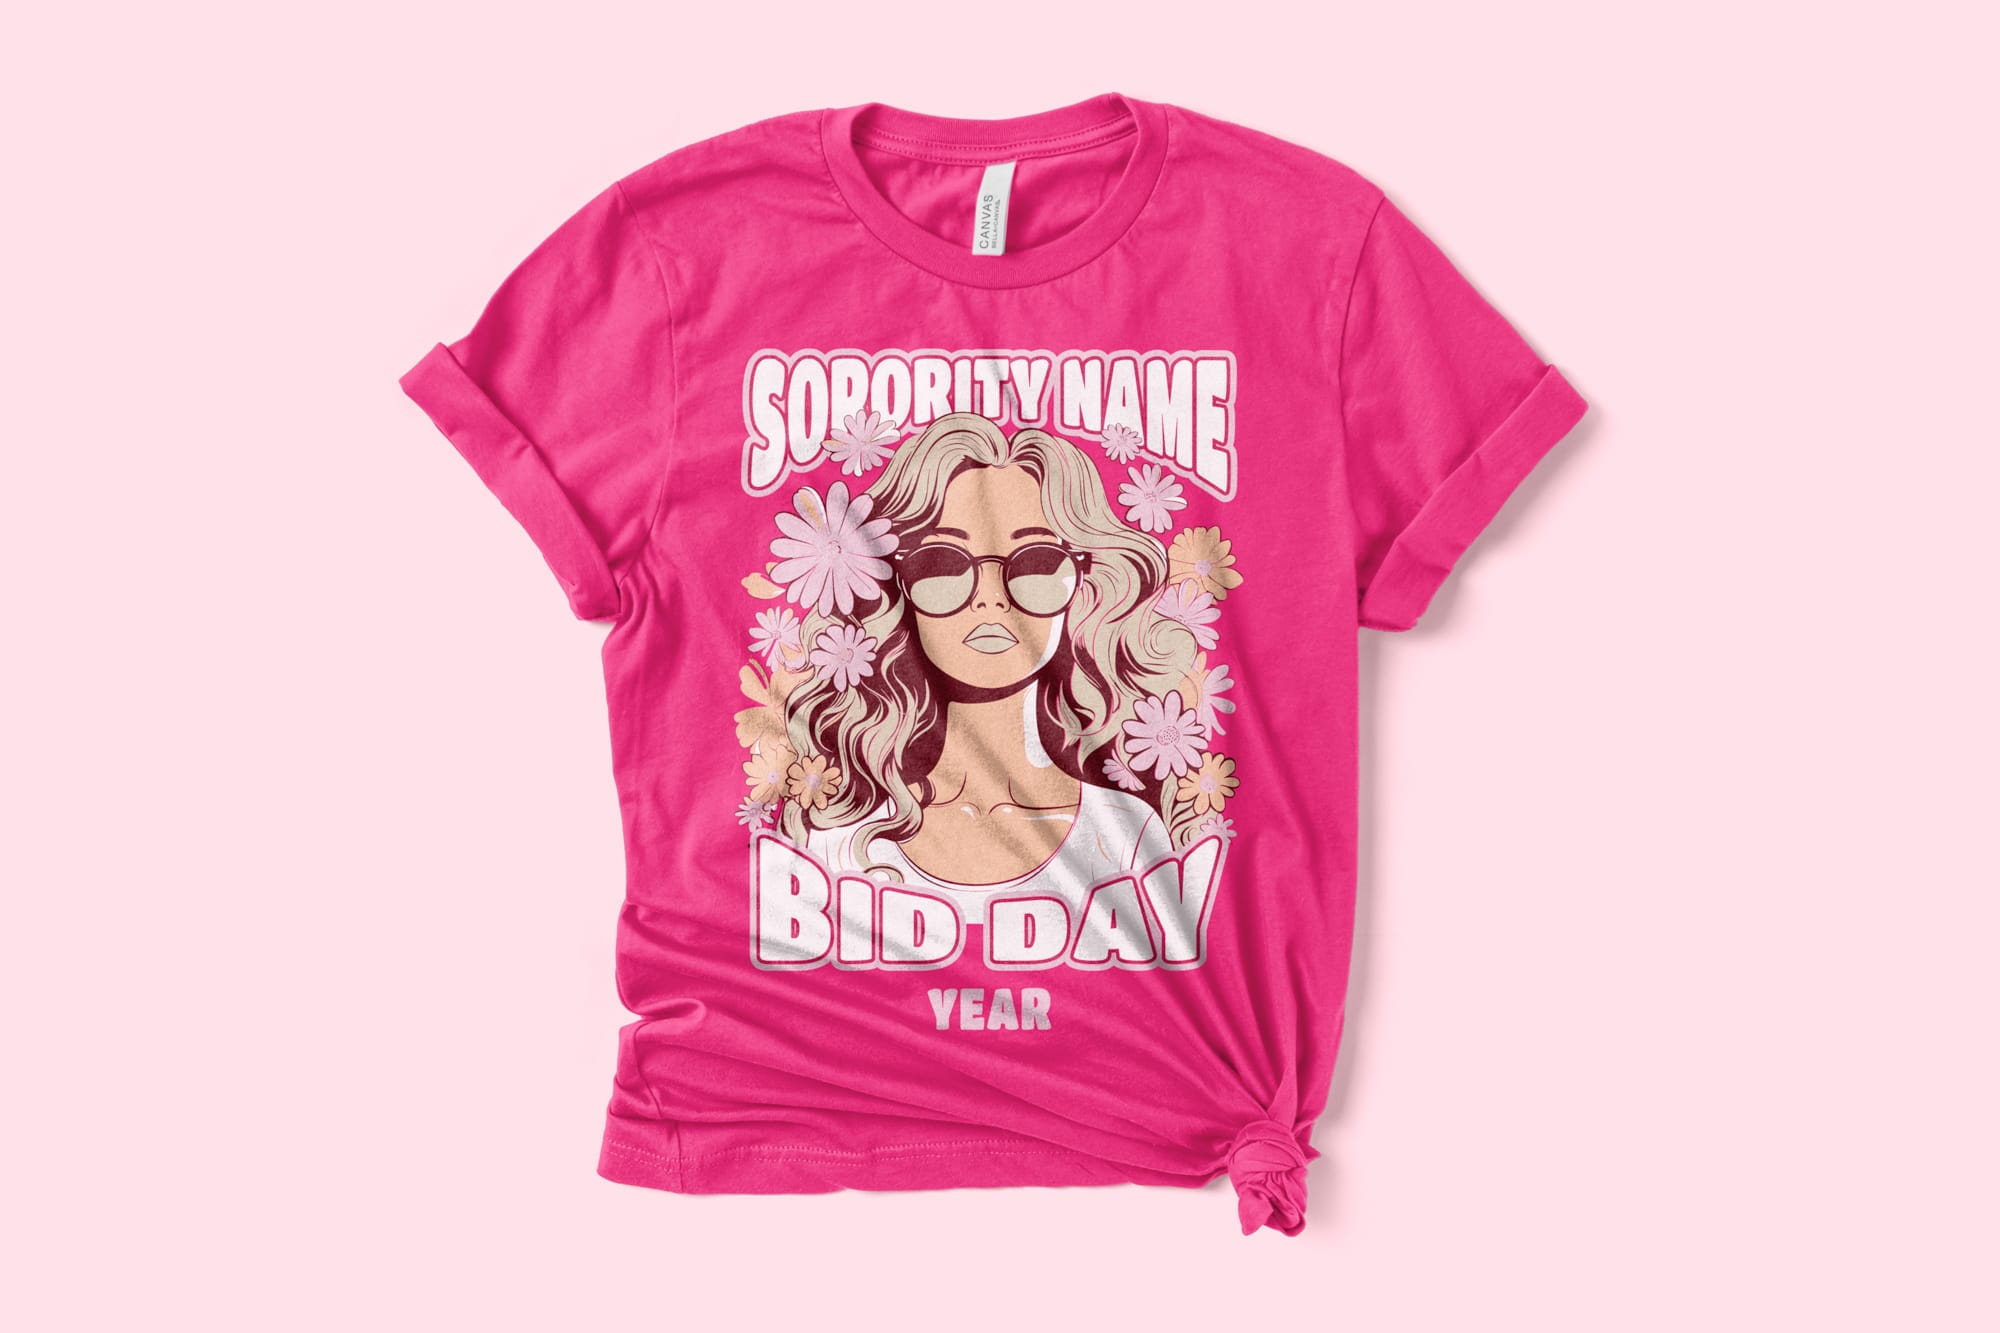 A bright pink shirt that has a barbie inspired design of a girl surrounded by flowers and bold text.